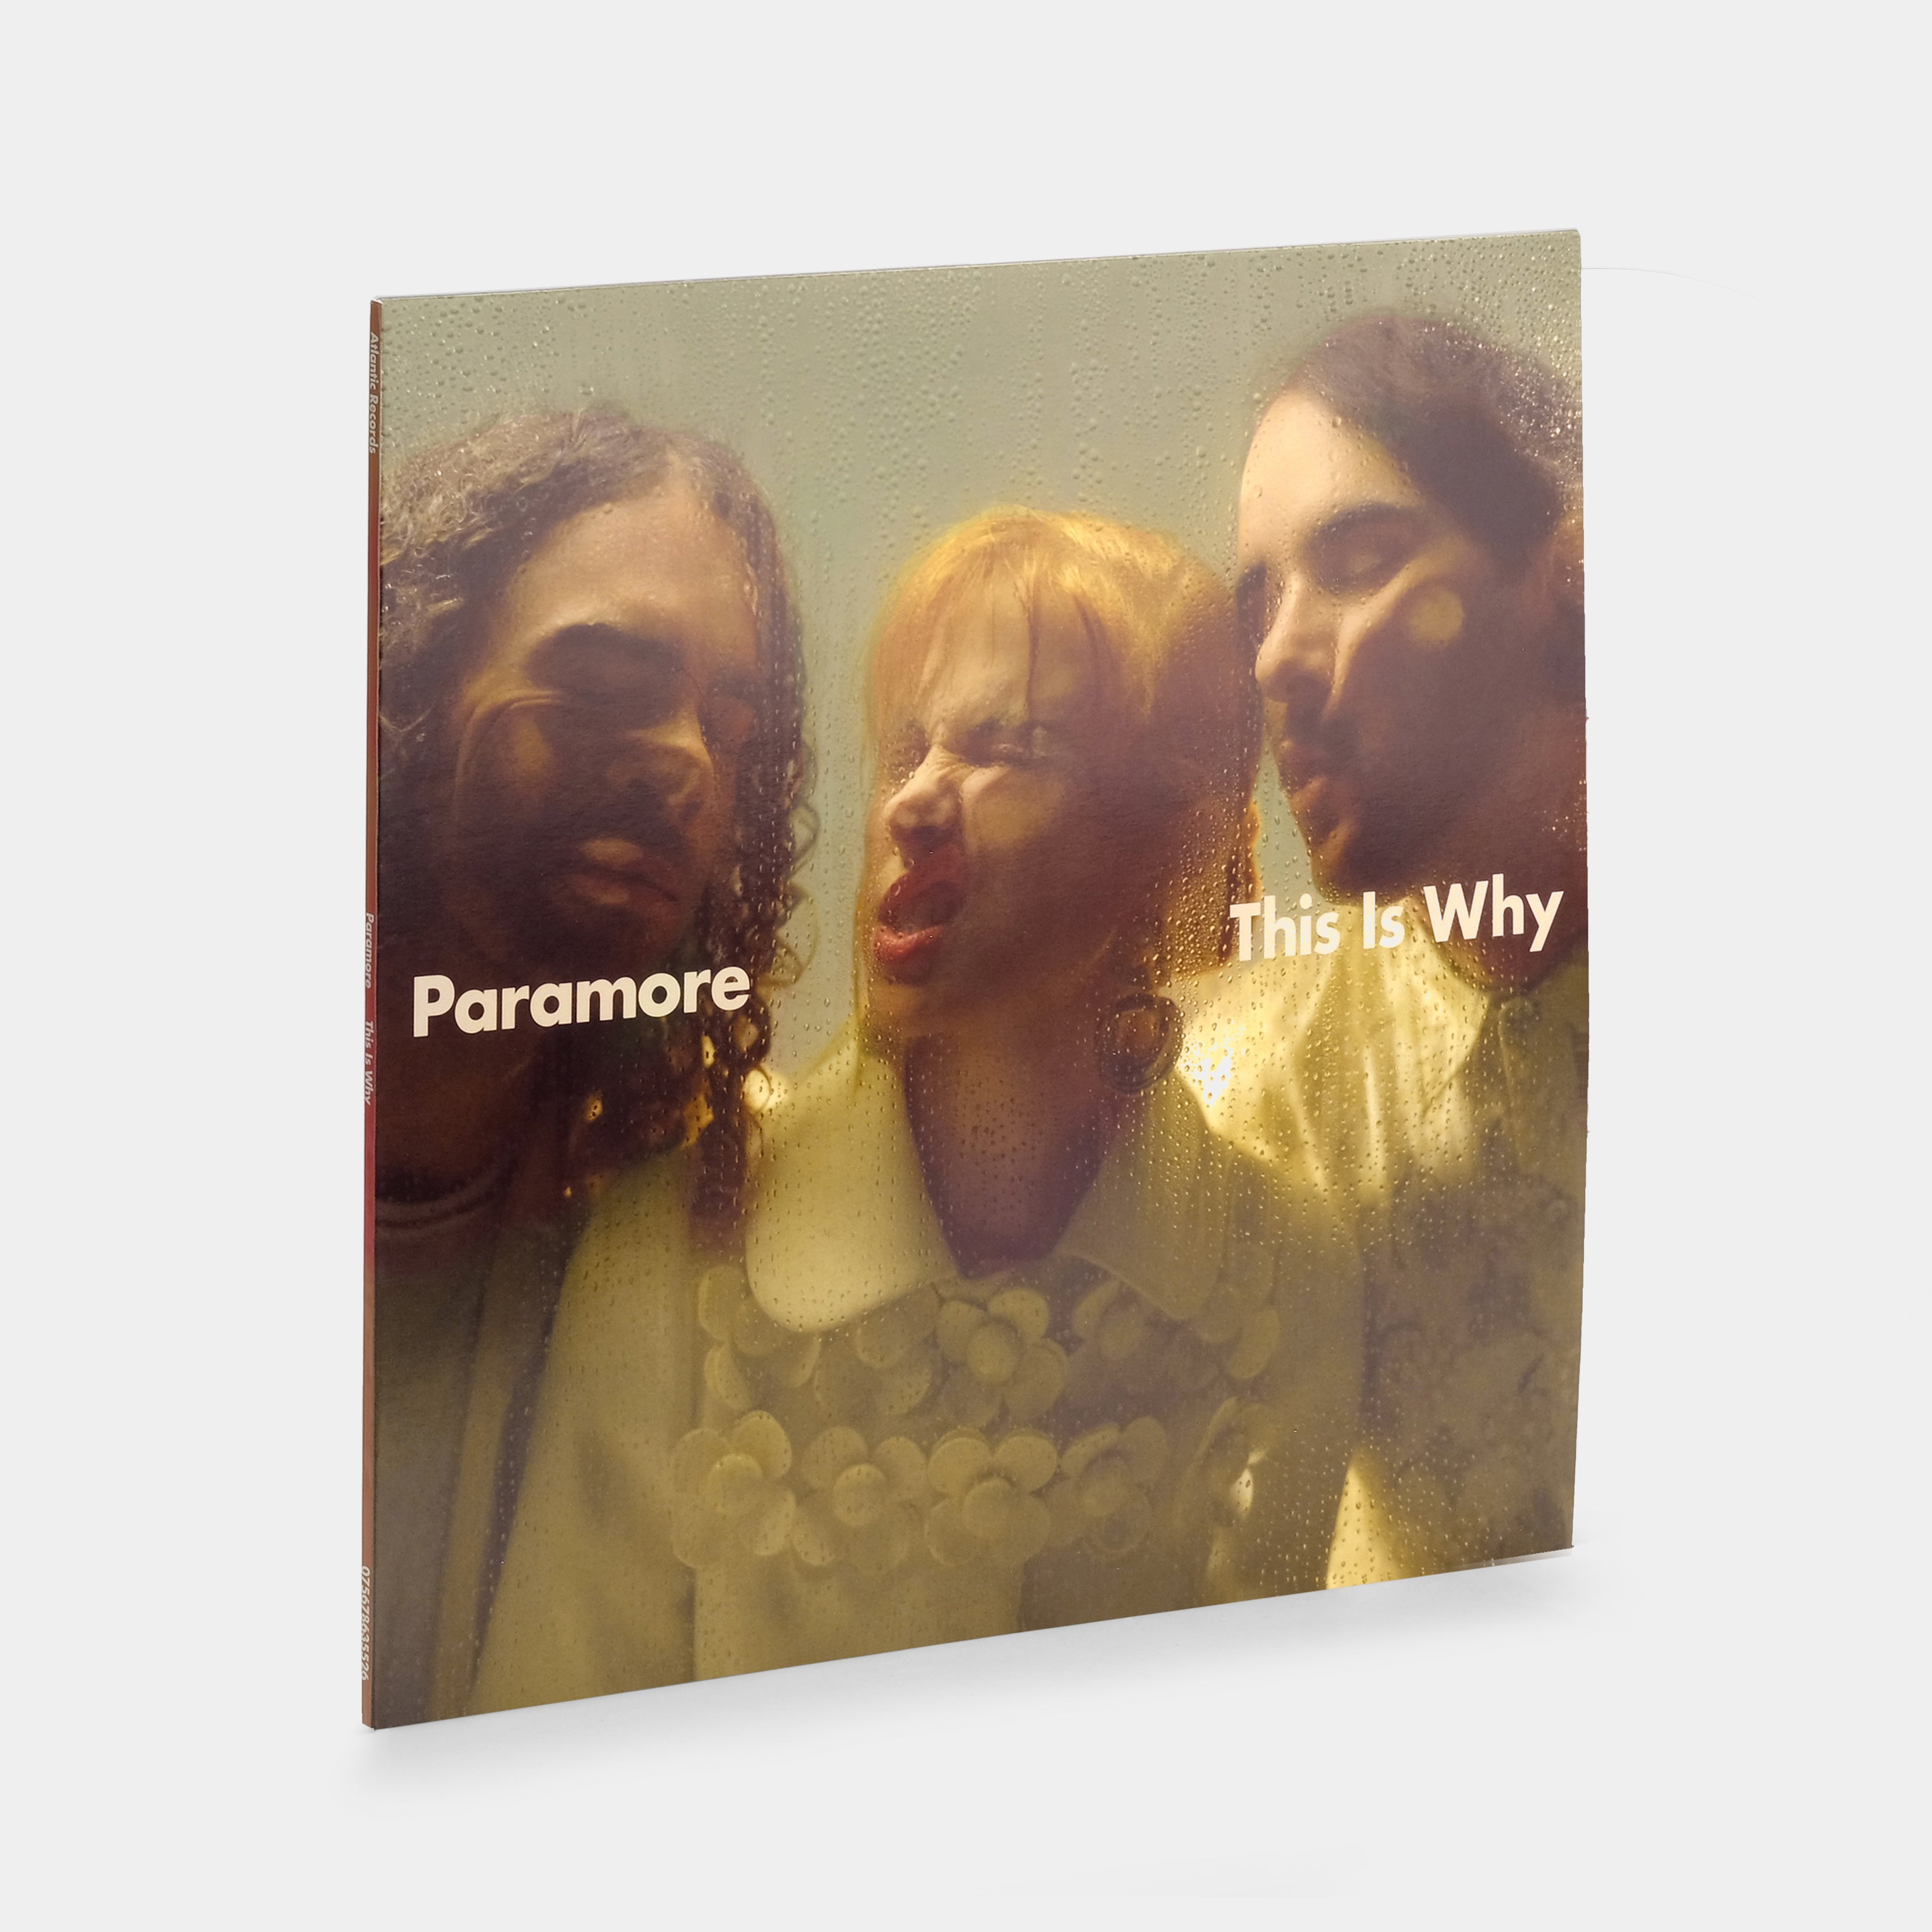 Paramore - This Is Why LP Vinyl Record